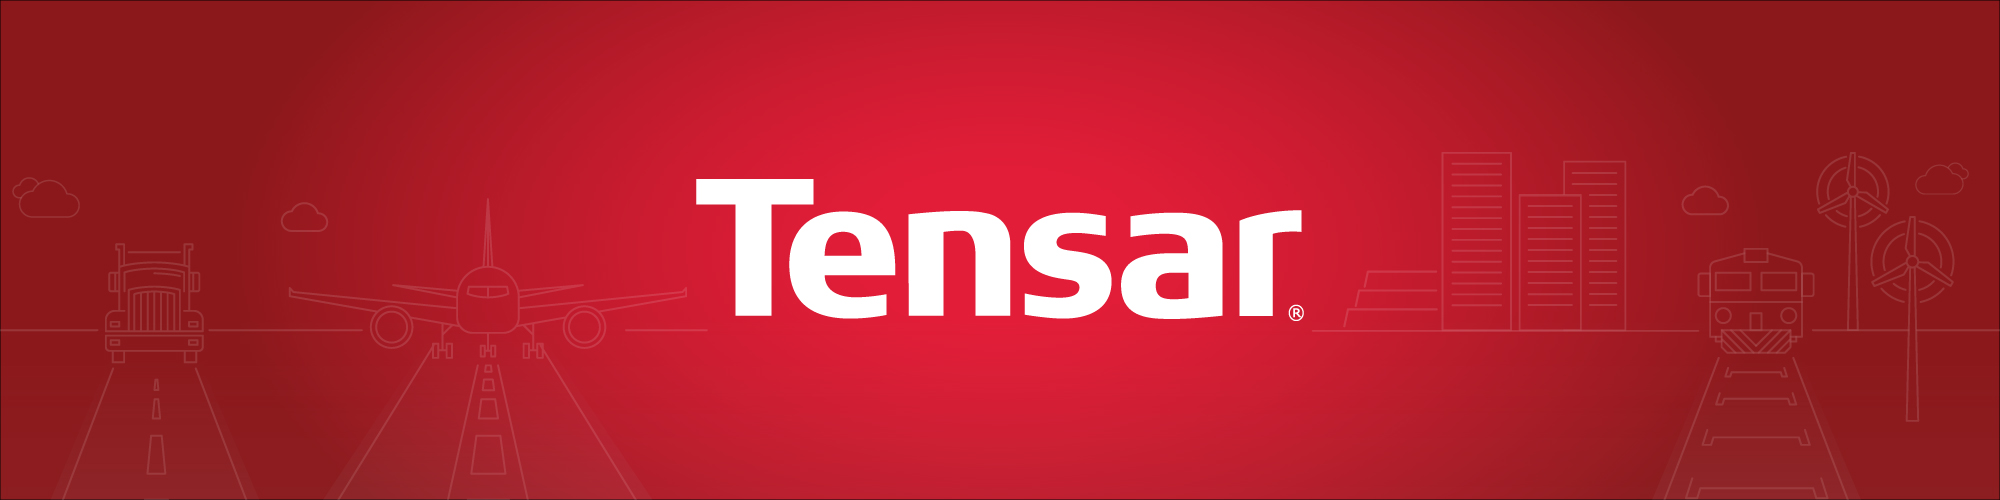 What is Tensar?